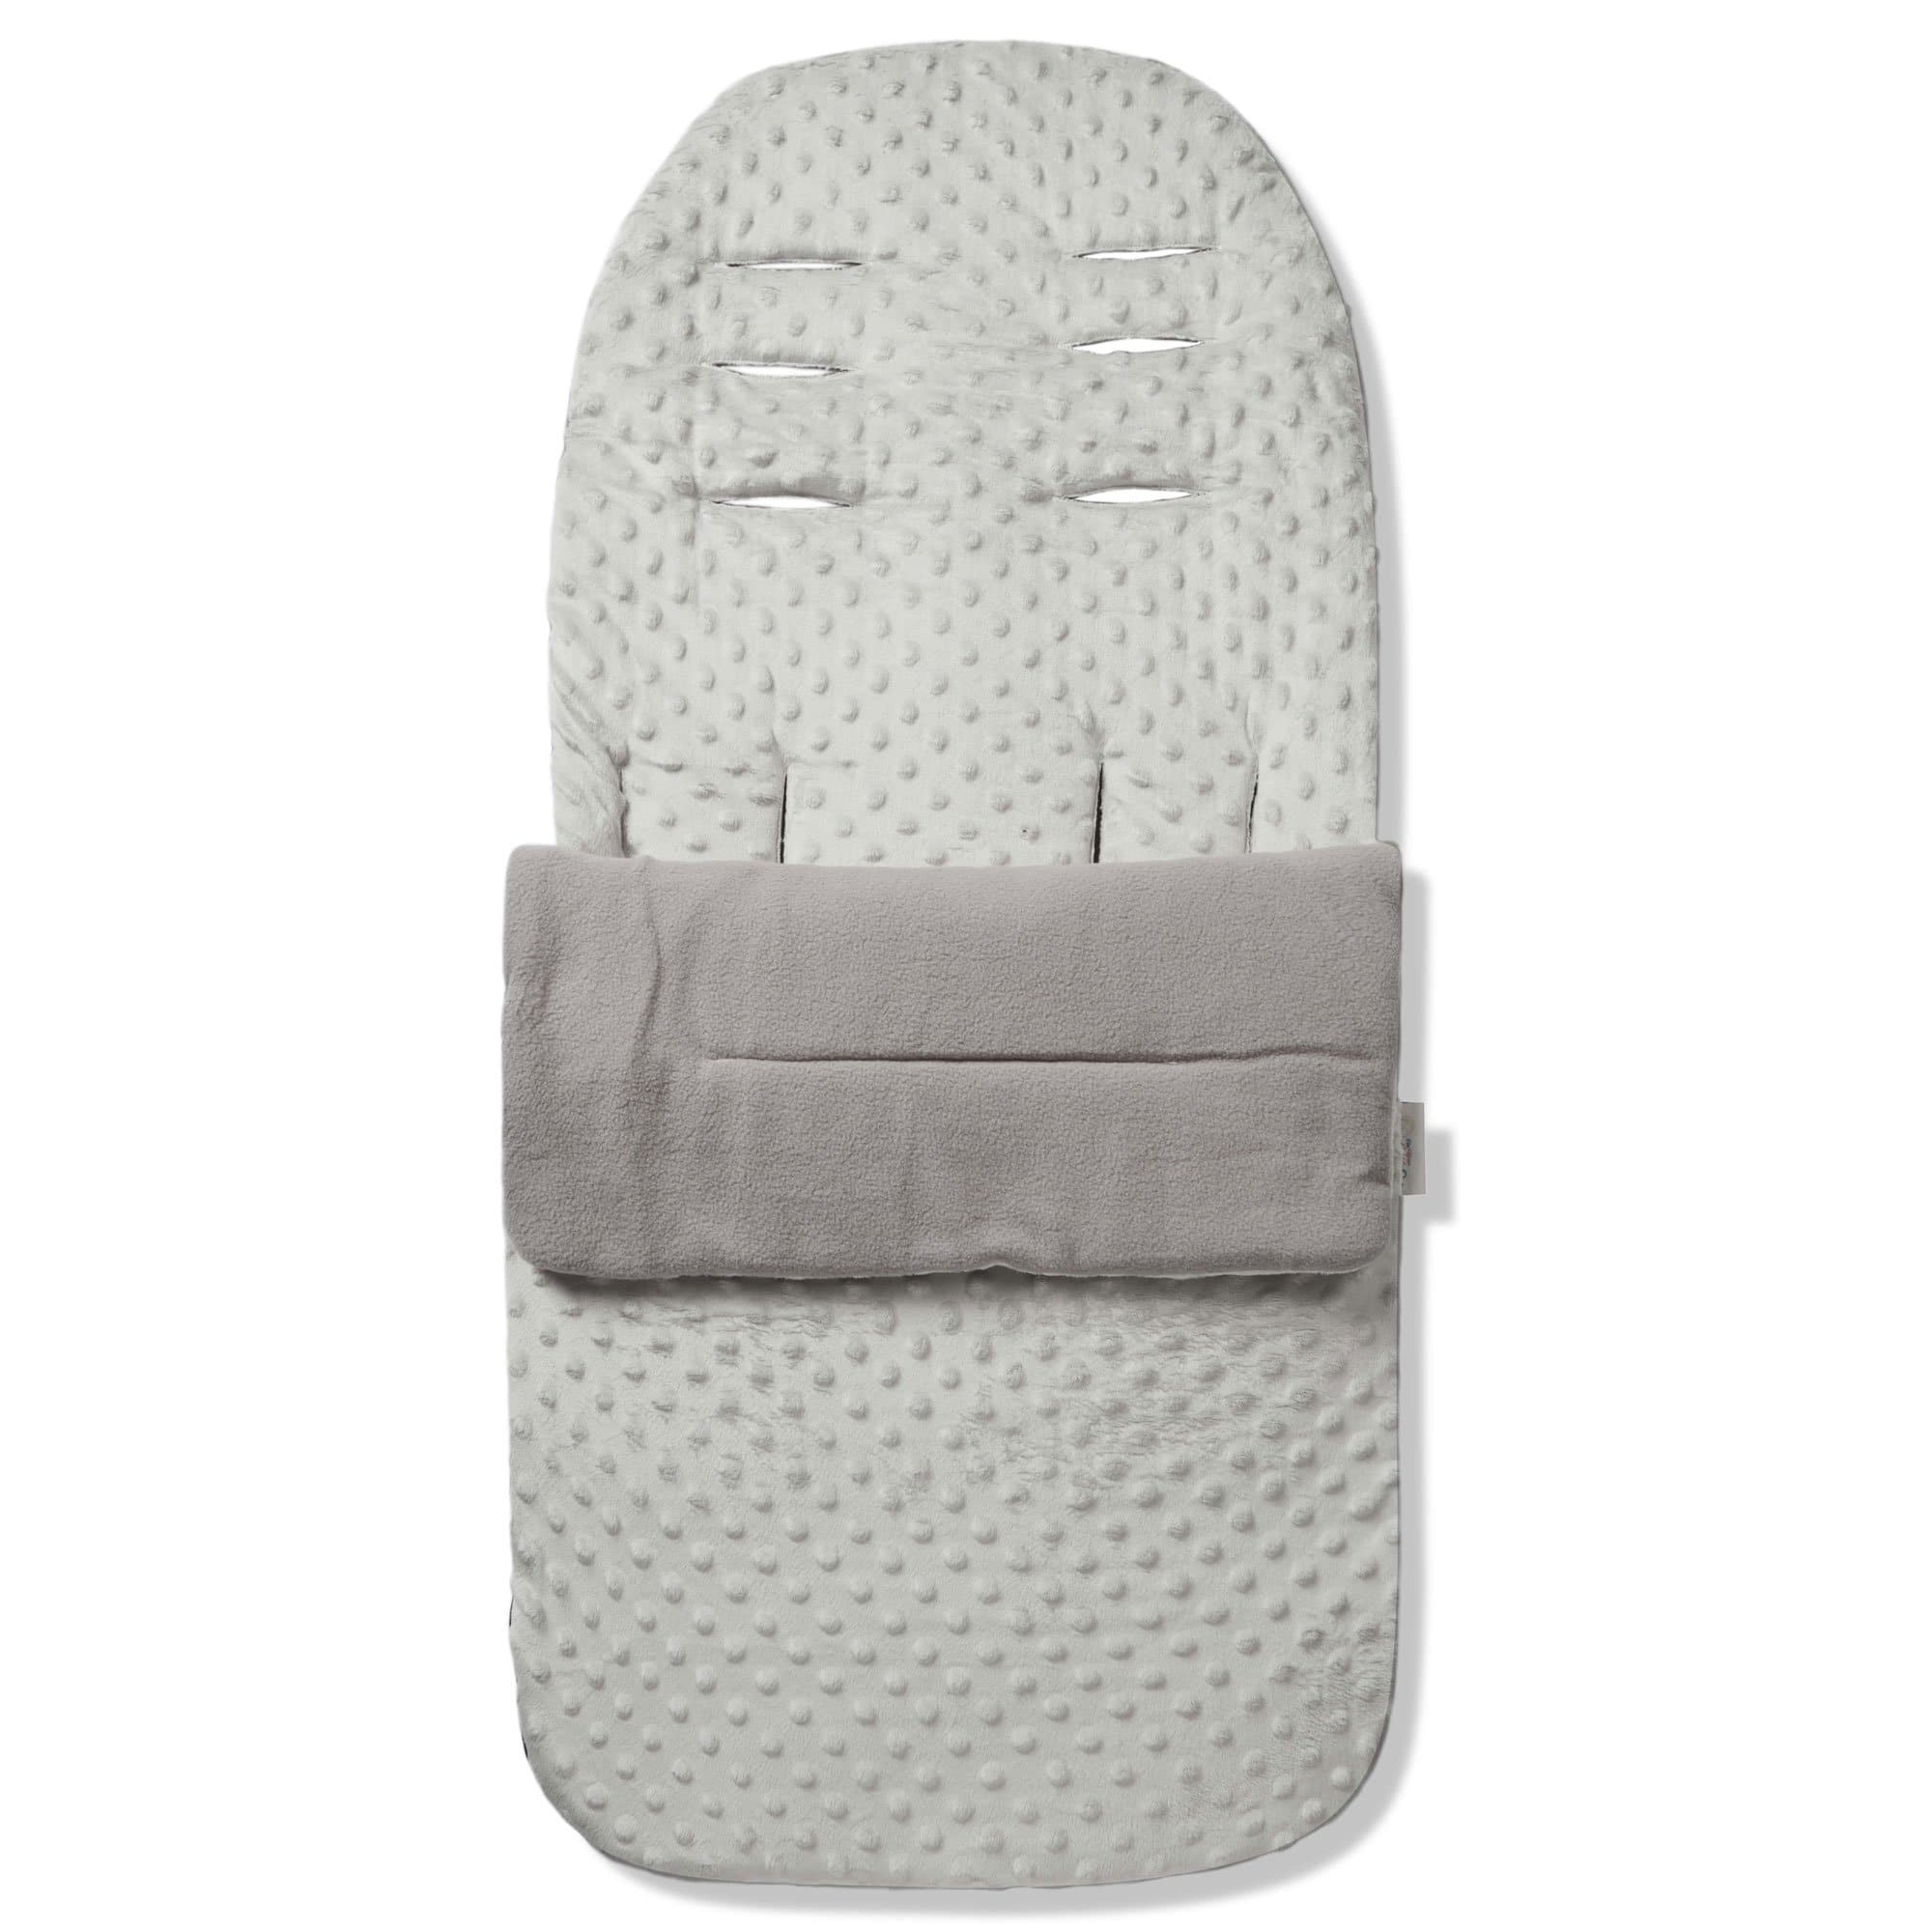 Dimple Footmuff / Cosy Toes Compatible with Pericles - Grey / Fits All Models | For Your Little One